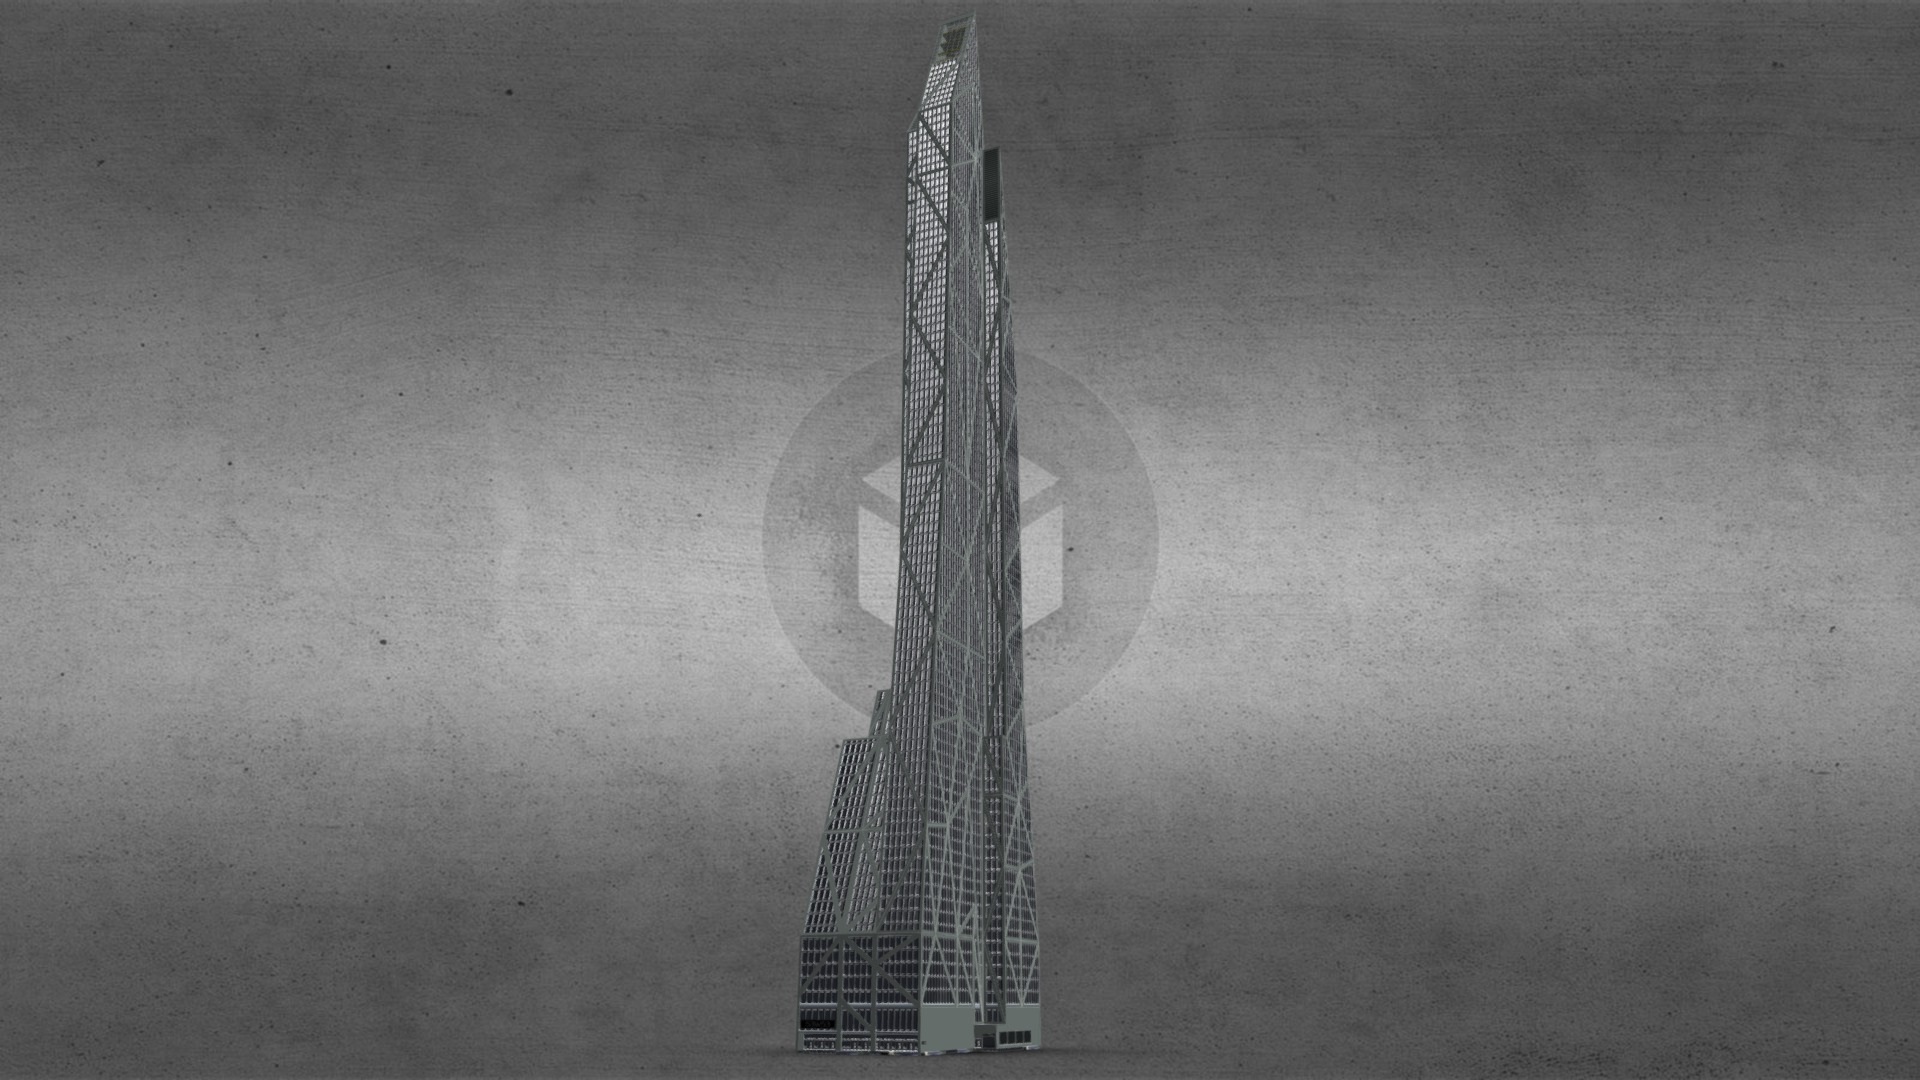 3D model 53W53 – Glass Tower – New York - This is a 3D model of the 53W53 - Glass Tower - New York. The 3D model is about a tall metal tower.